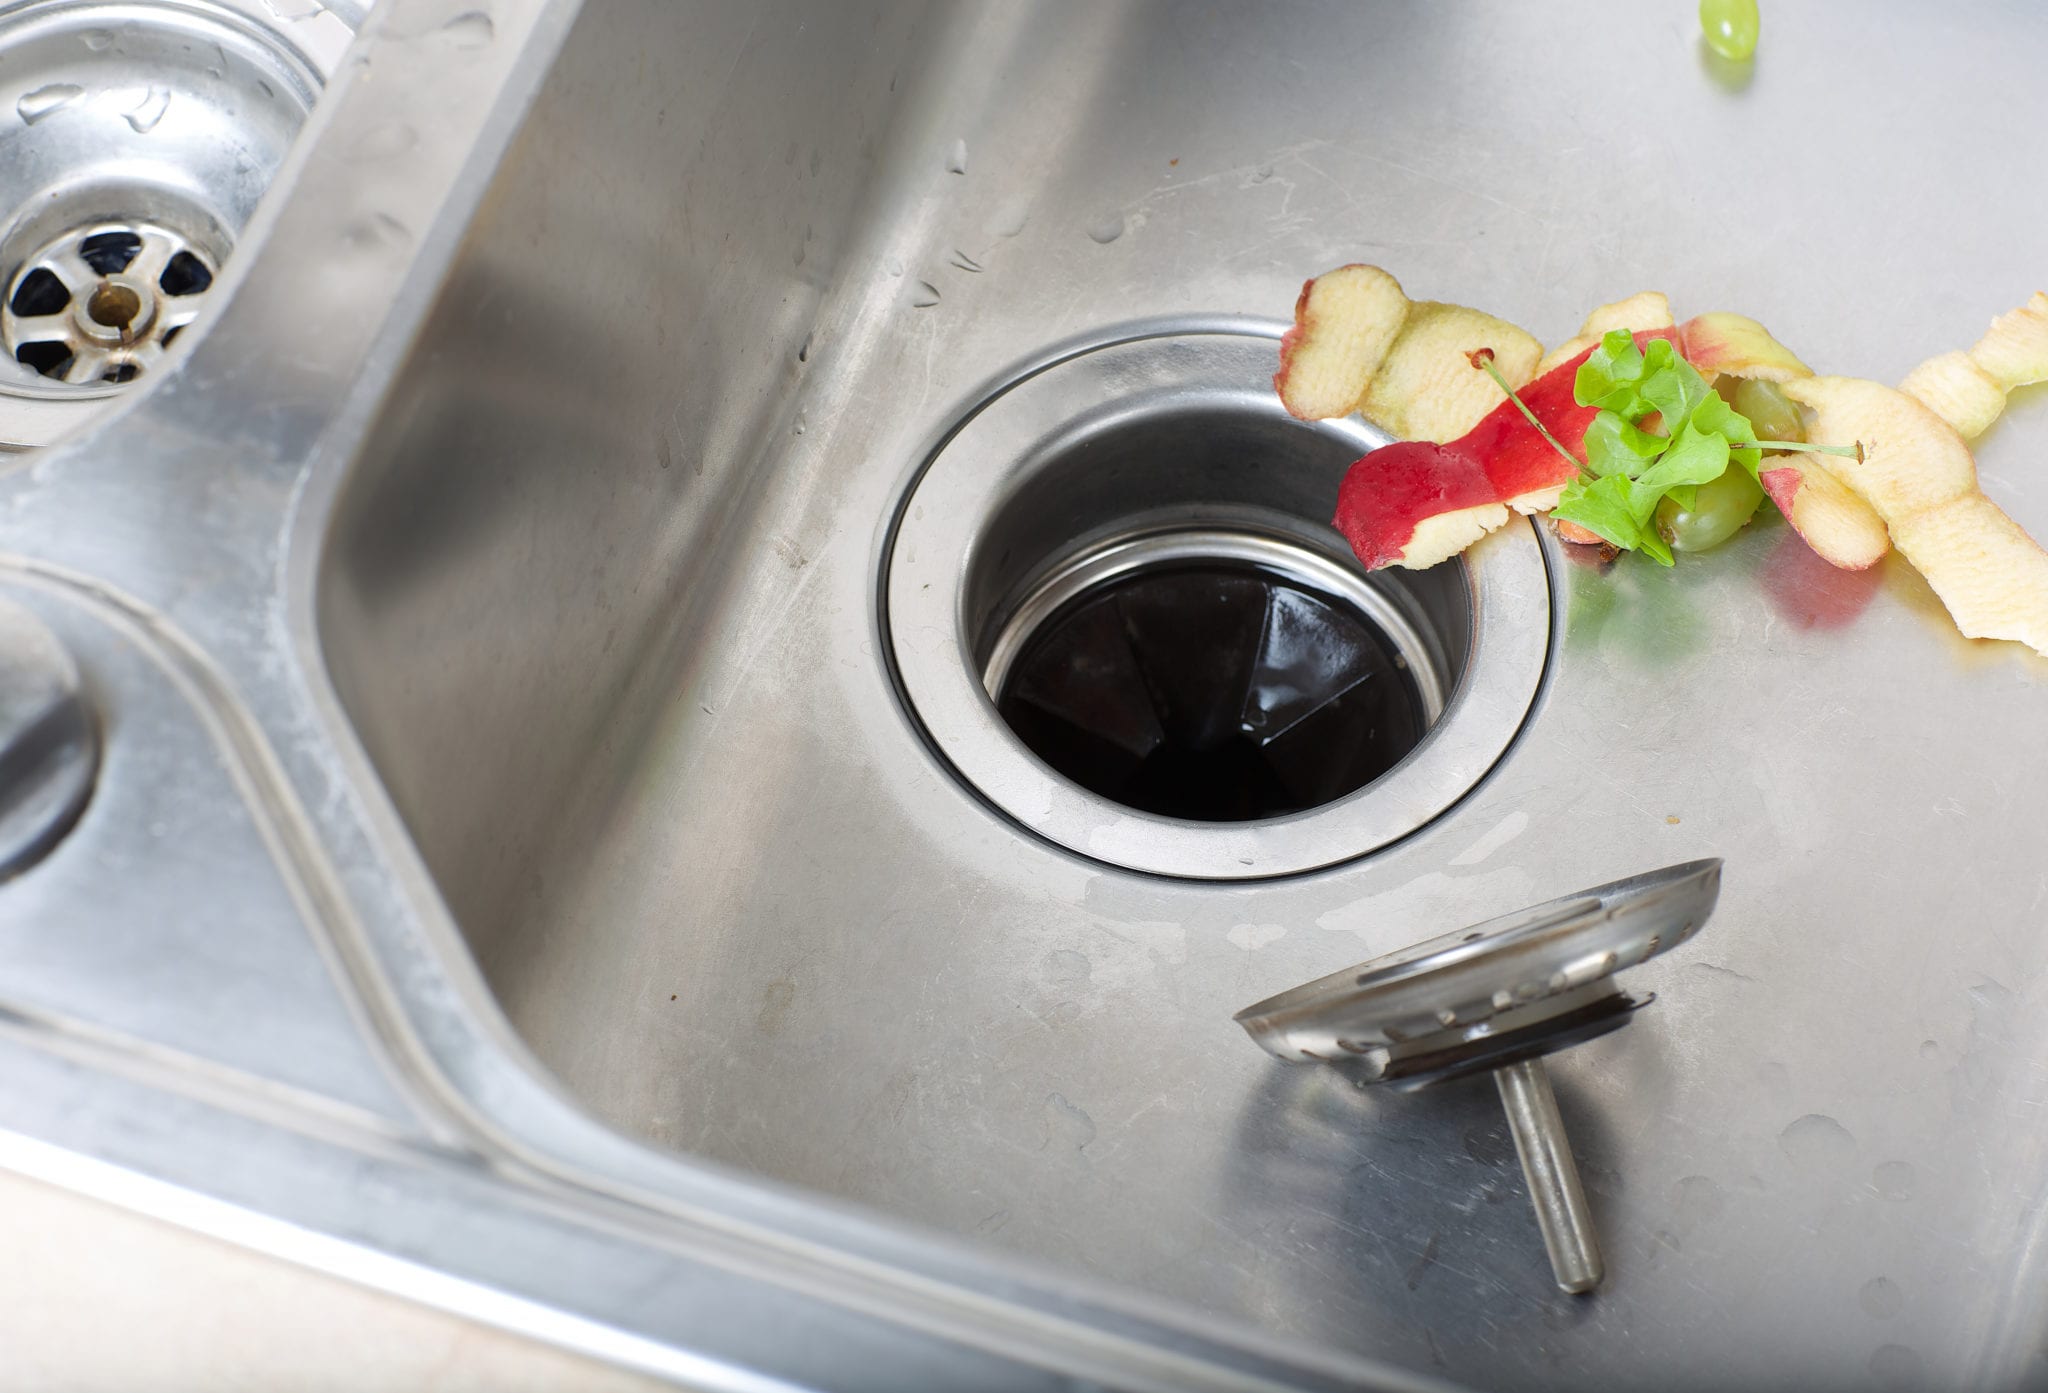 How to Eliminate Garbage Disposal Smells